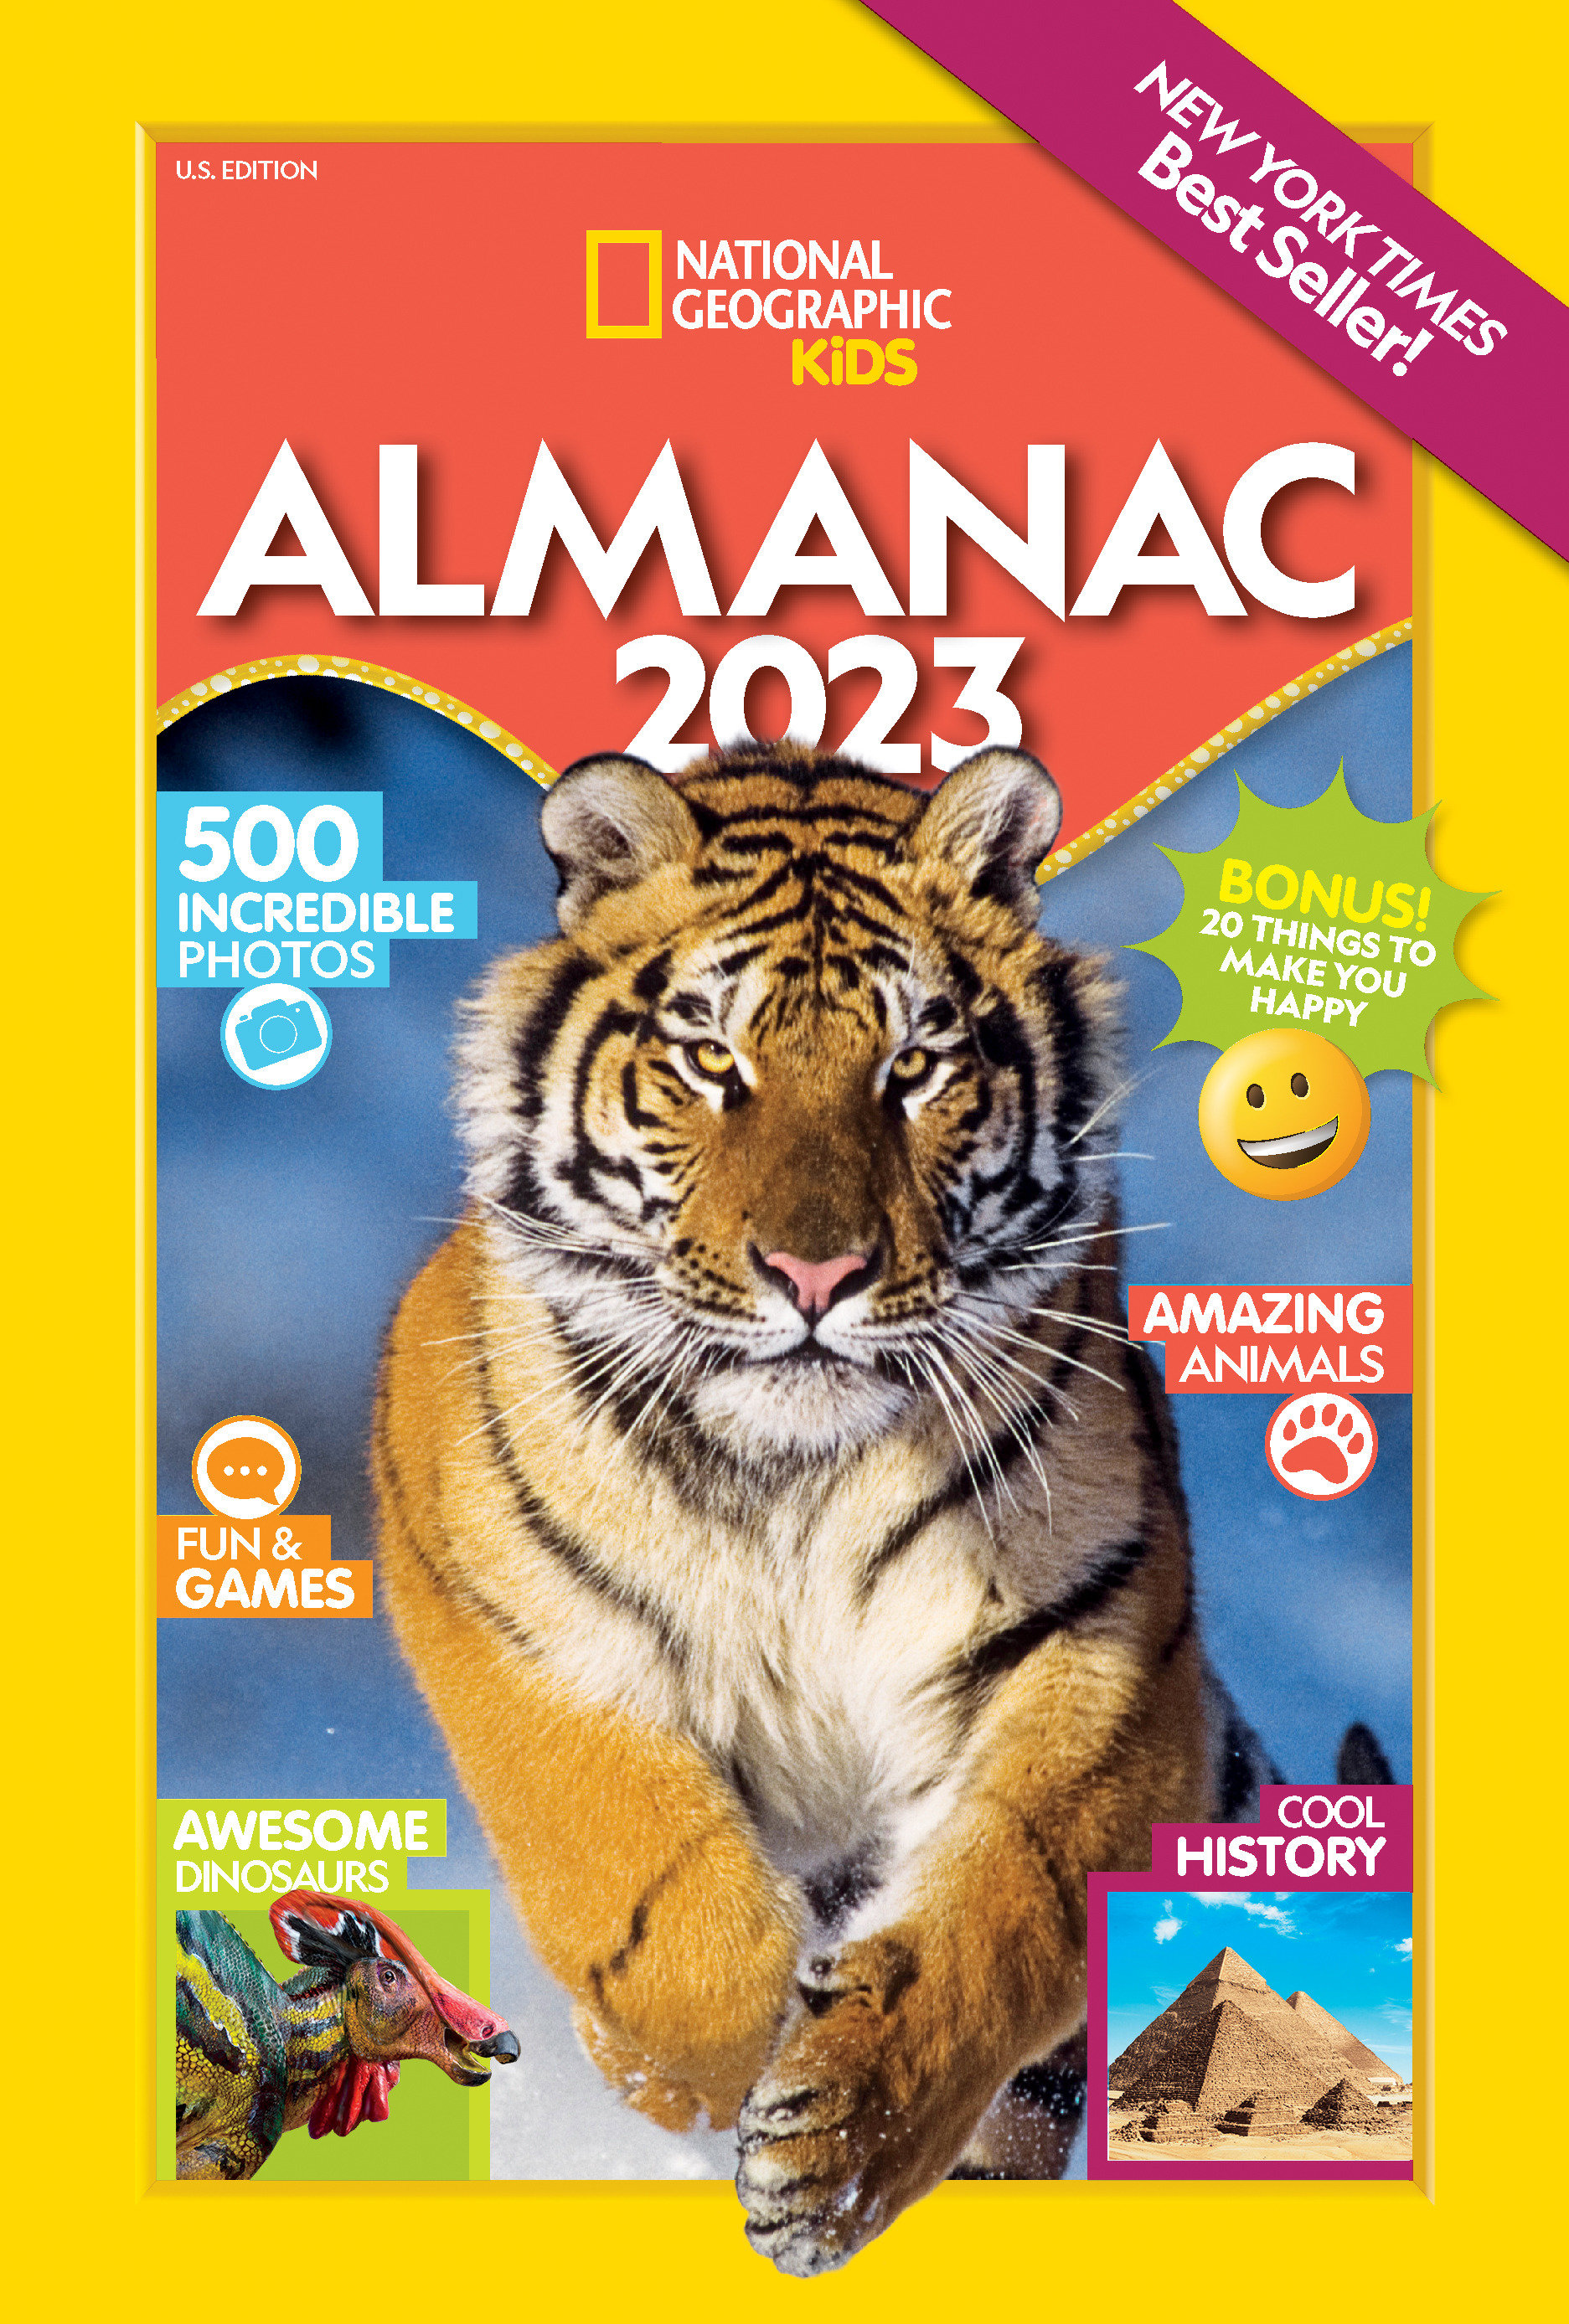 National Geographic Kids Almanac 2023 (Us Edition) (Hardcover Book)